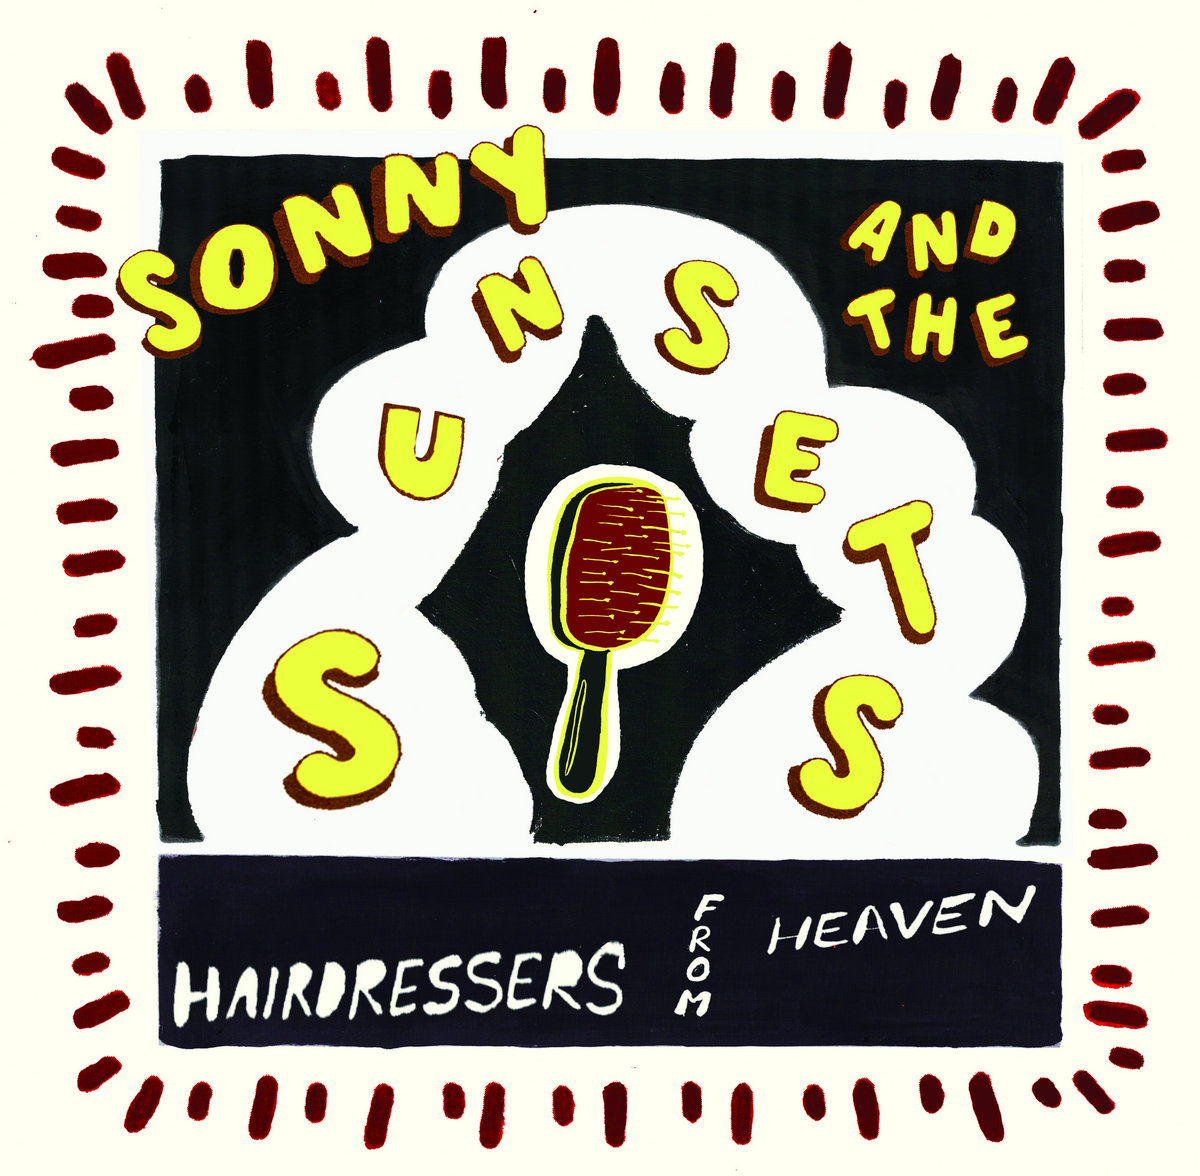 Hairdressers From Heaven Sonny The Sunsets